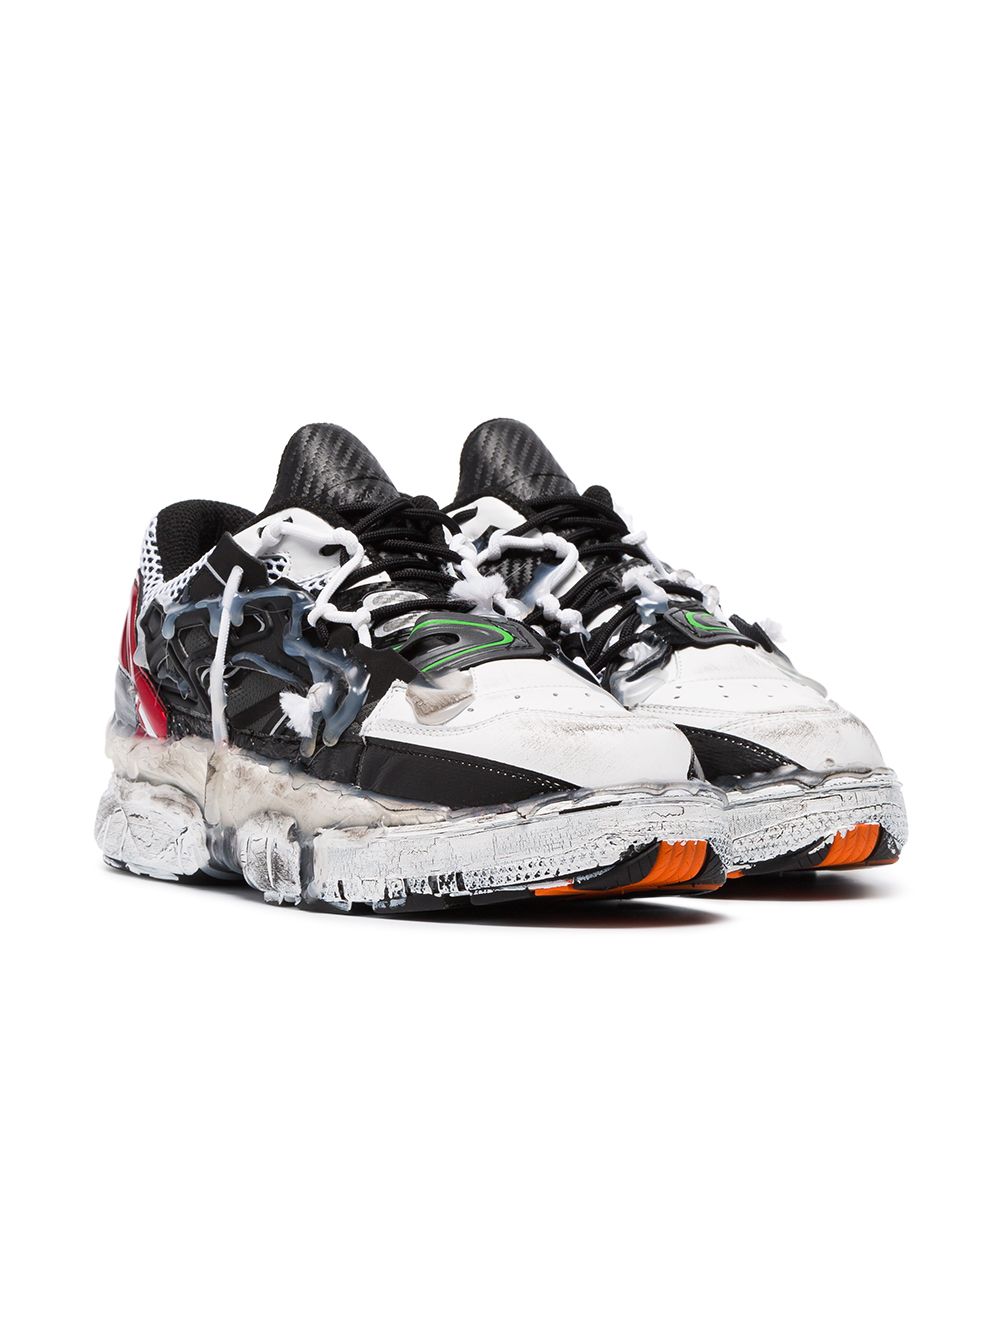 Maison Margiela Fusion Reconstructed Sneakers - Farfetch